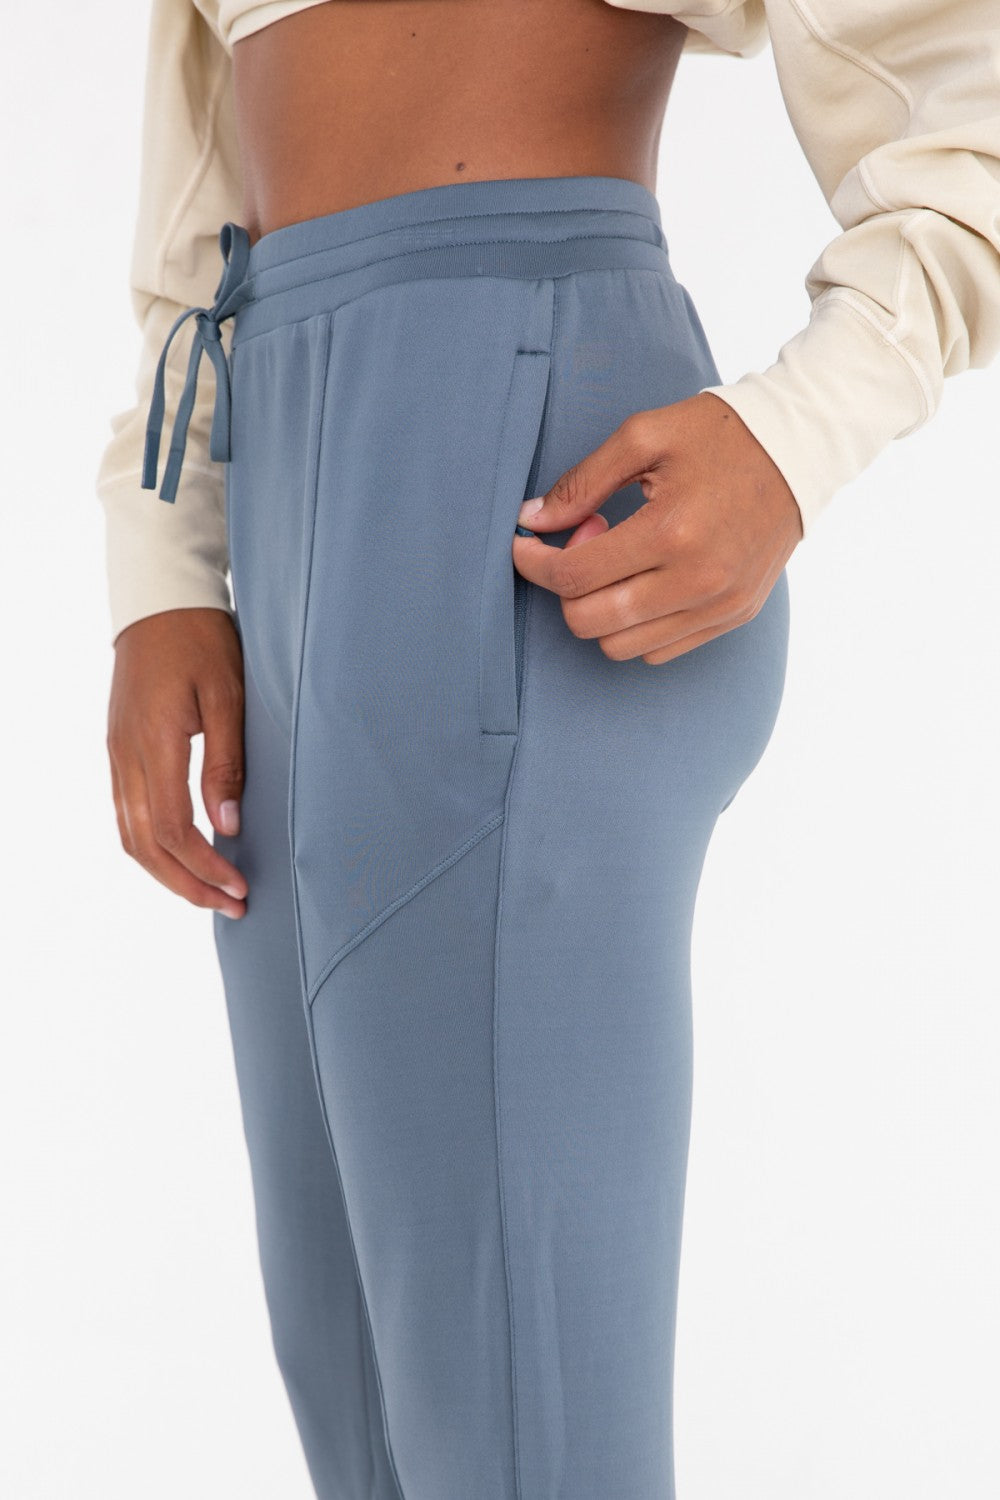 Cuffed Joggers with Zippered Pockets in 2 colors